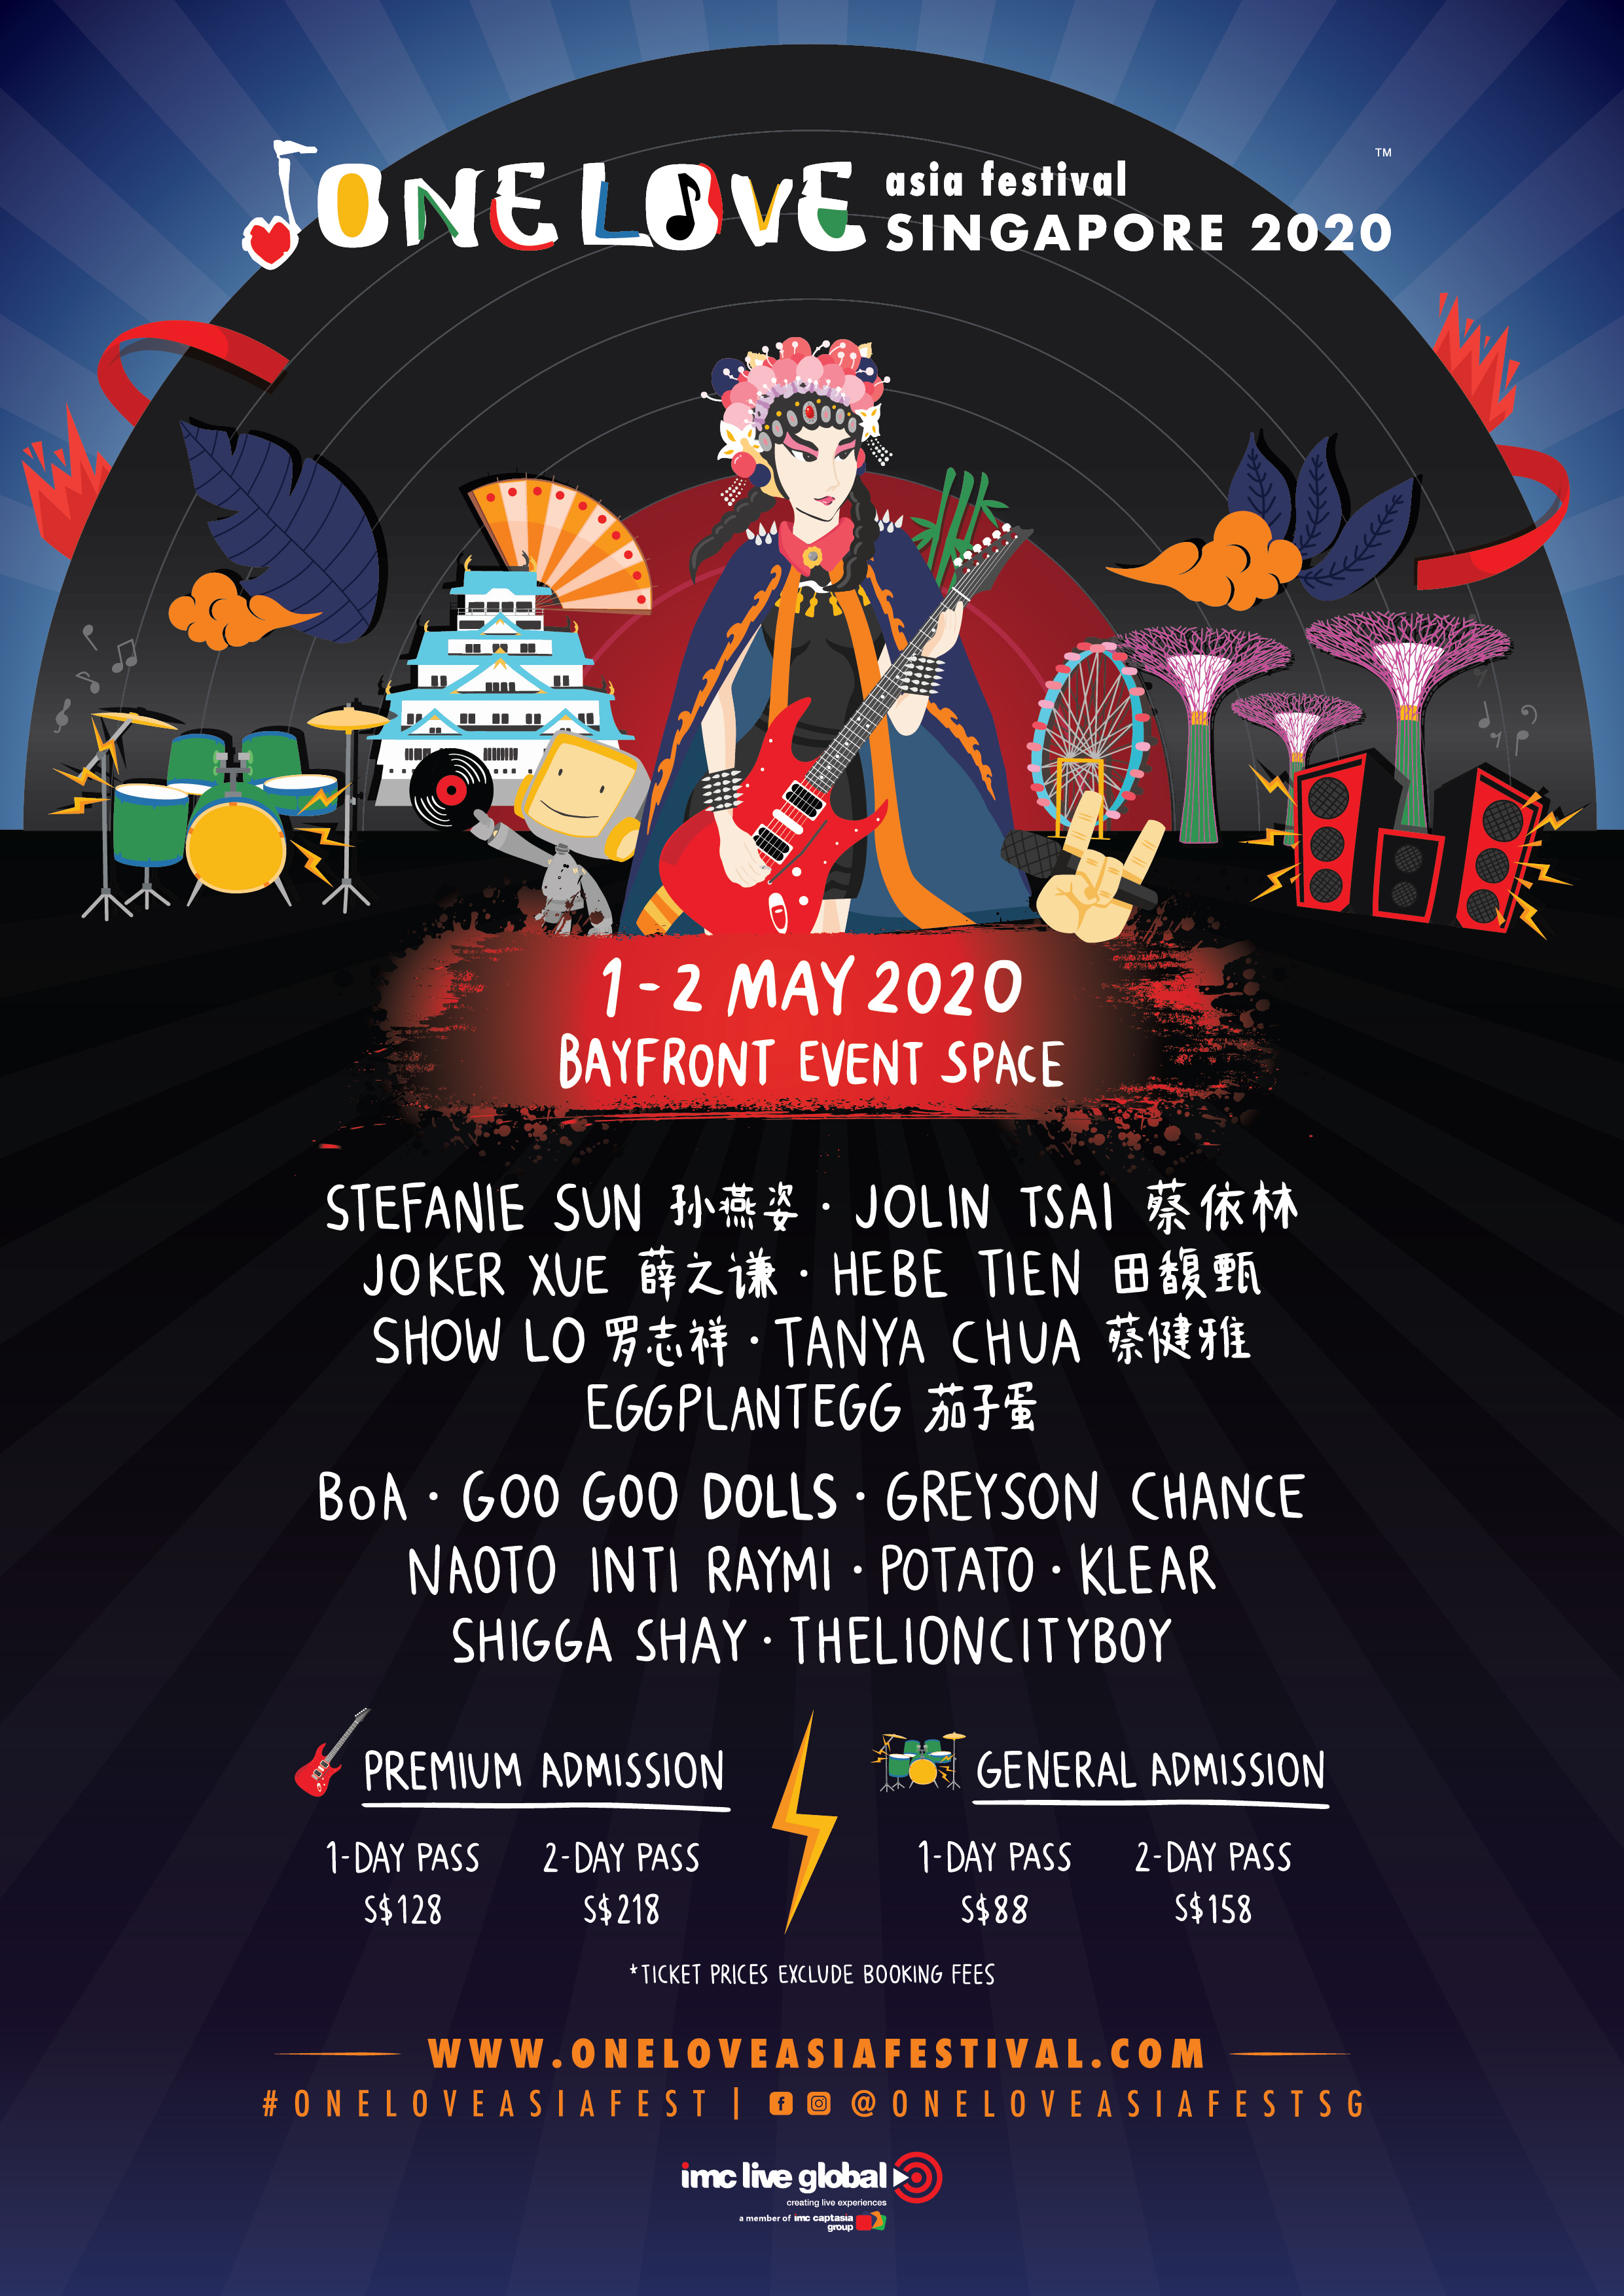 Asia’s first music and lifestyle mega festival